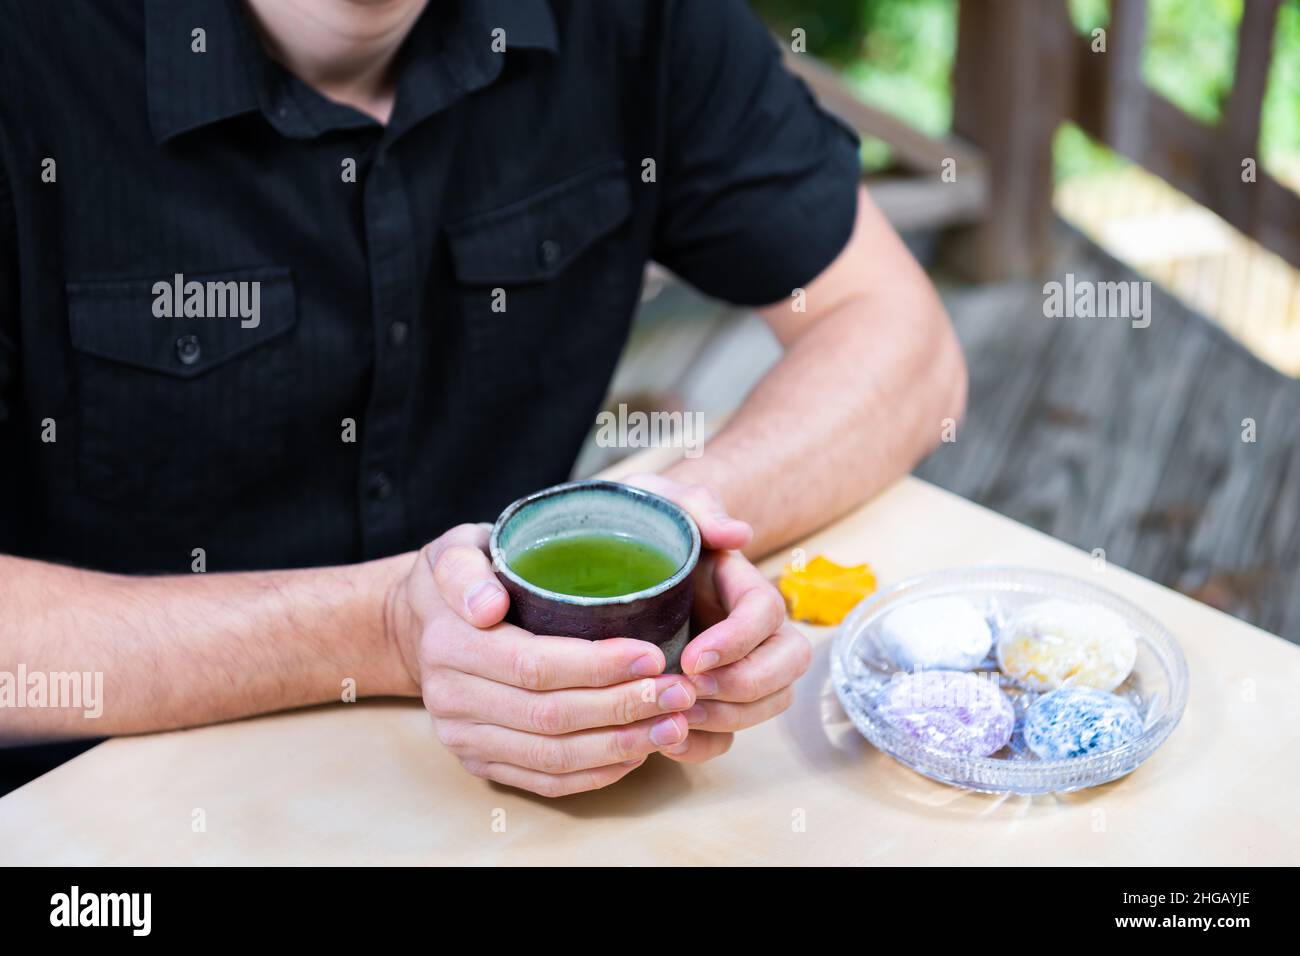 Man sitting at table with closeup of hands holding matcha green tea cup outside in backyard garden deck with Japanese daifuku mochi food Stock Photo